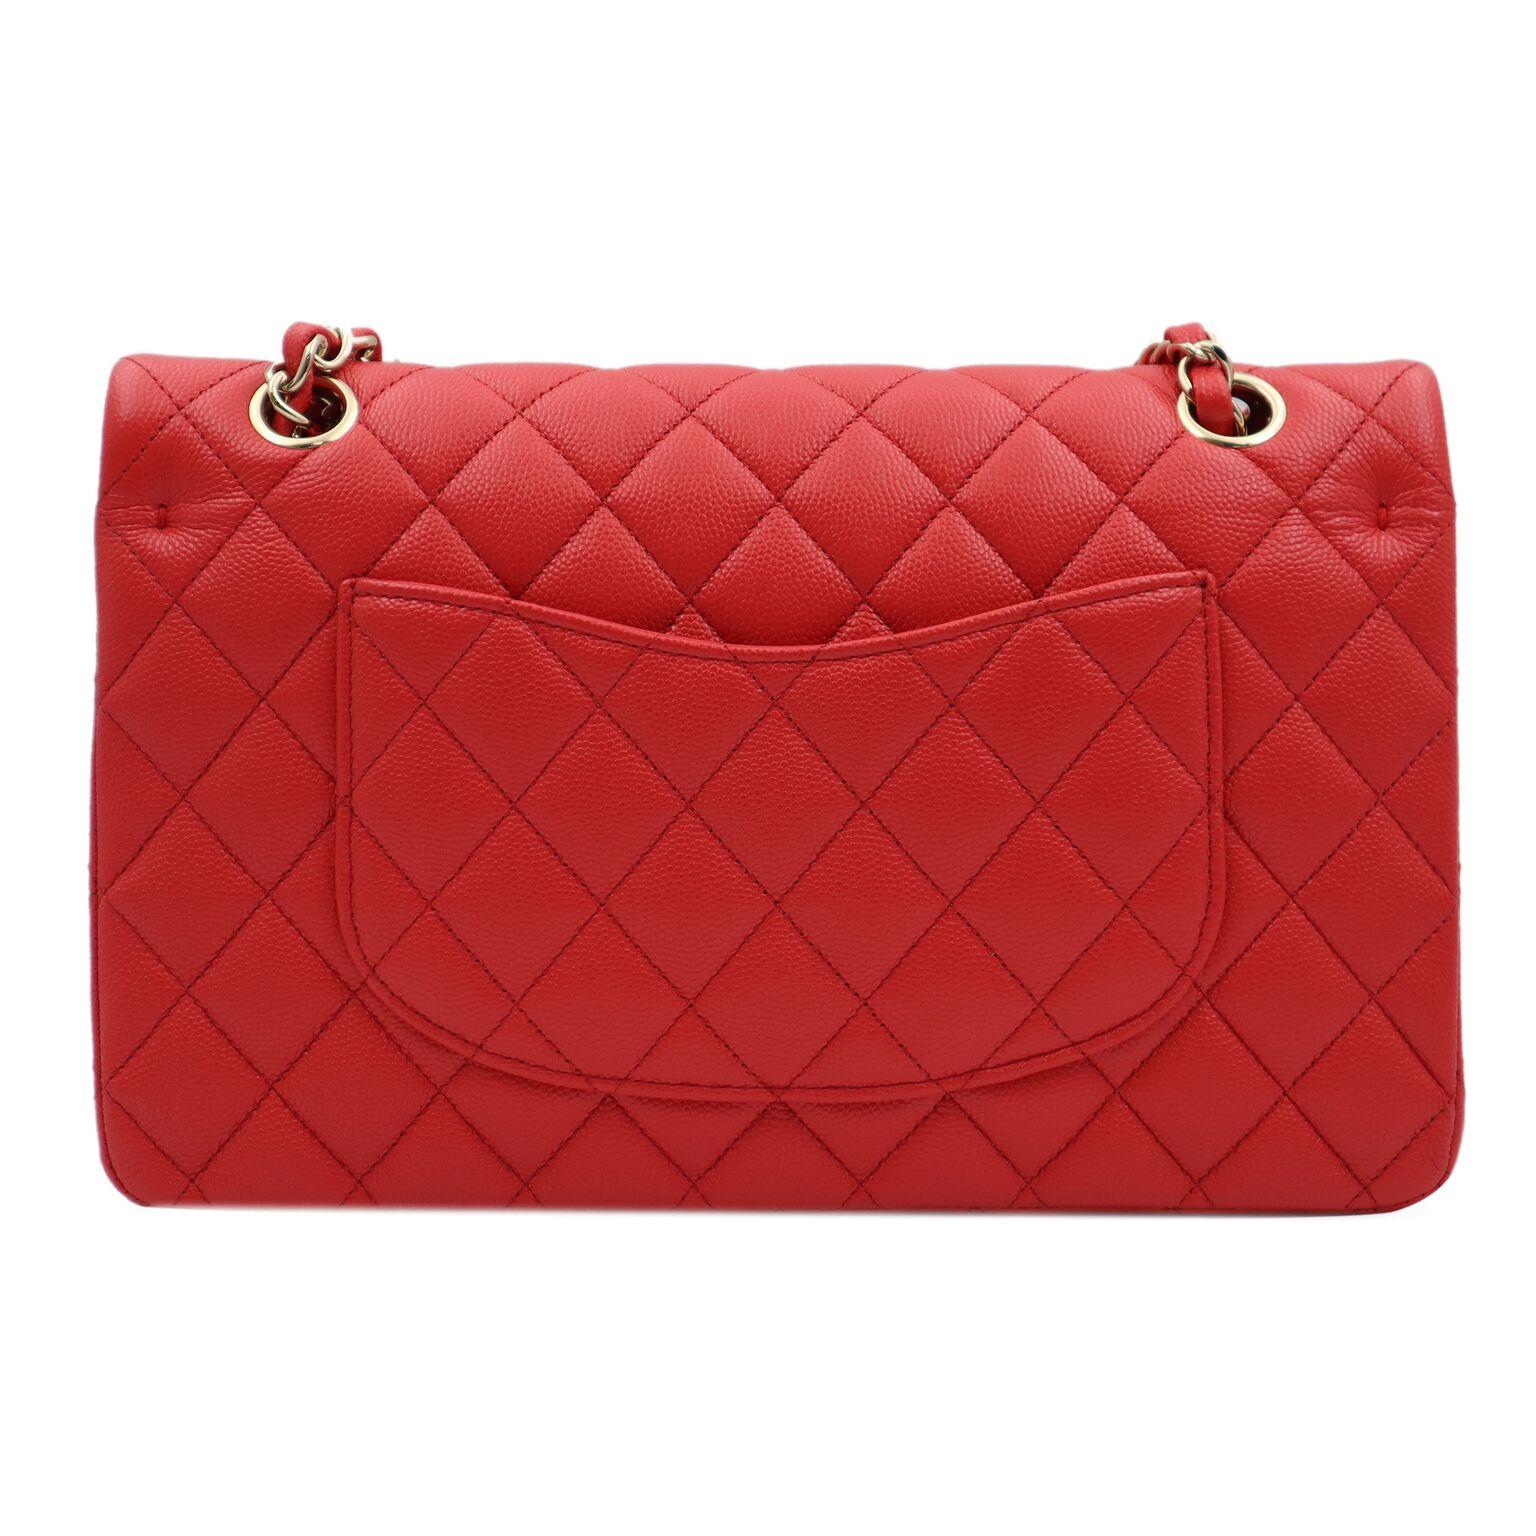 This chic Chanel classic medium flap bag is crafted of caviar leather in beautiful coral red color. The bag features a gold tone chain link leather threaded shoulder straps and a facing gold tone Chanel CC turn lock. The bag opens facing flap to a